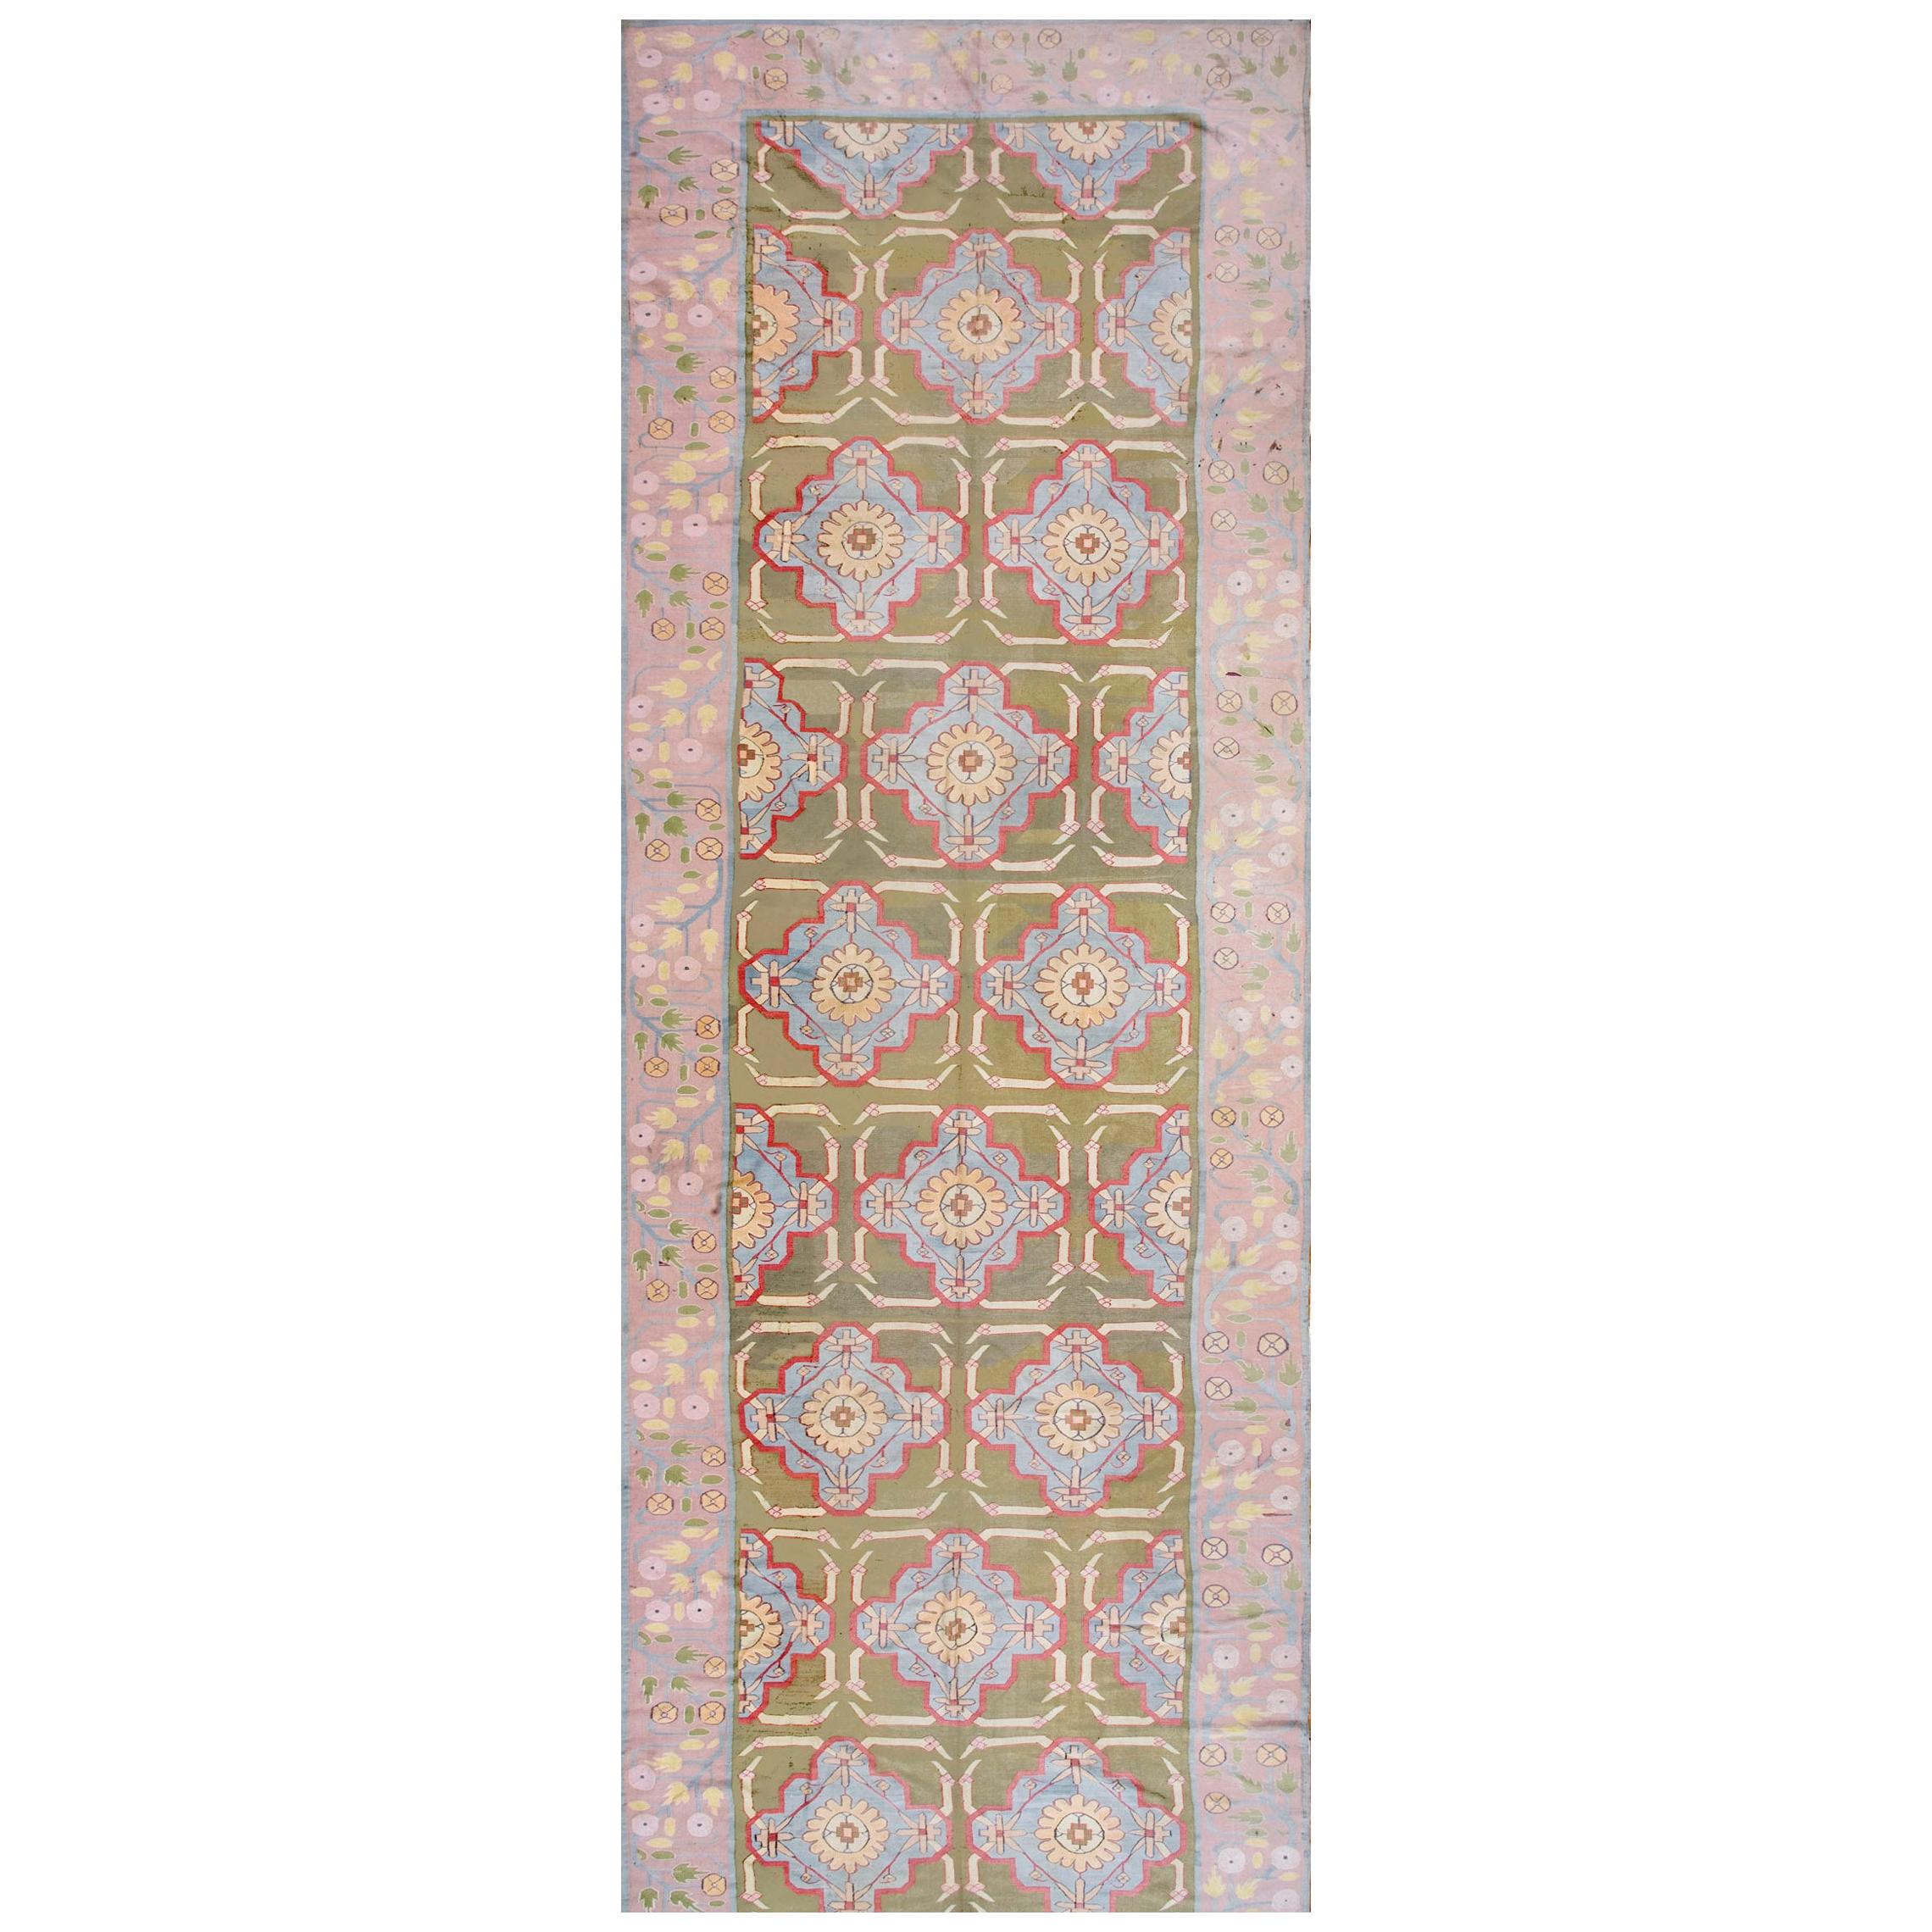 Early 20th Century Indian Cotton Dhurrie Carpet ( 6'8" x 28'2" - 203 x 860 ) For Sale